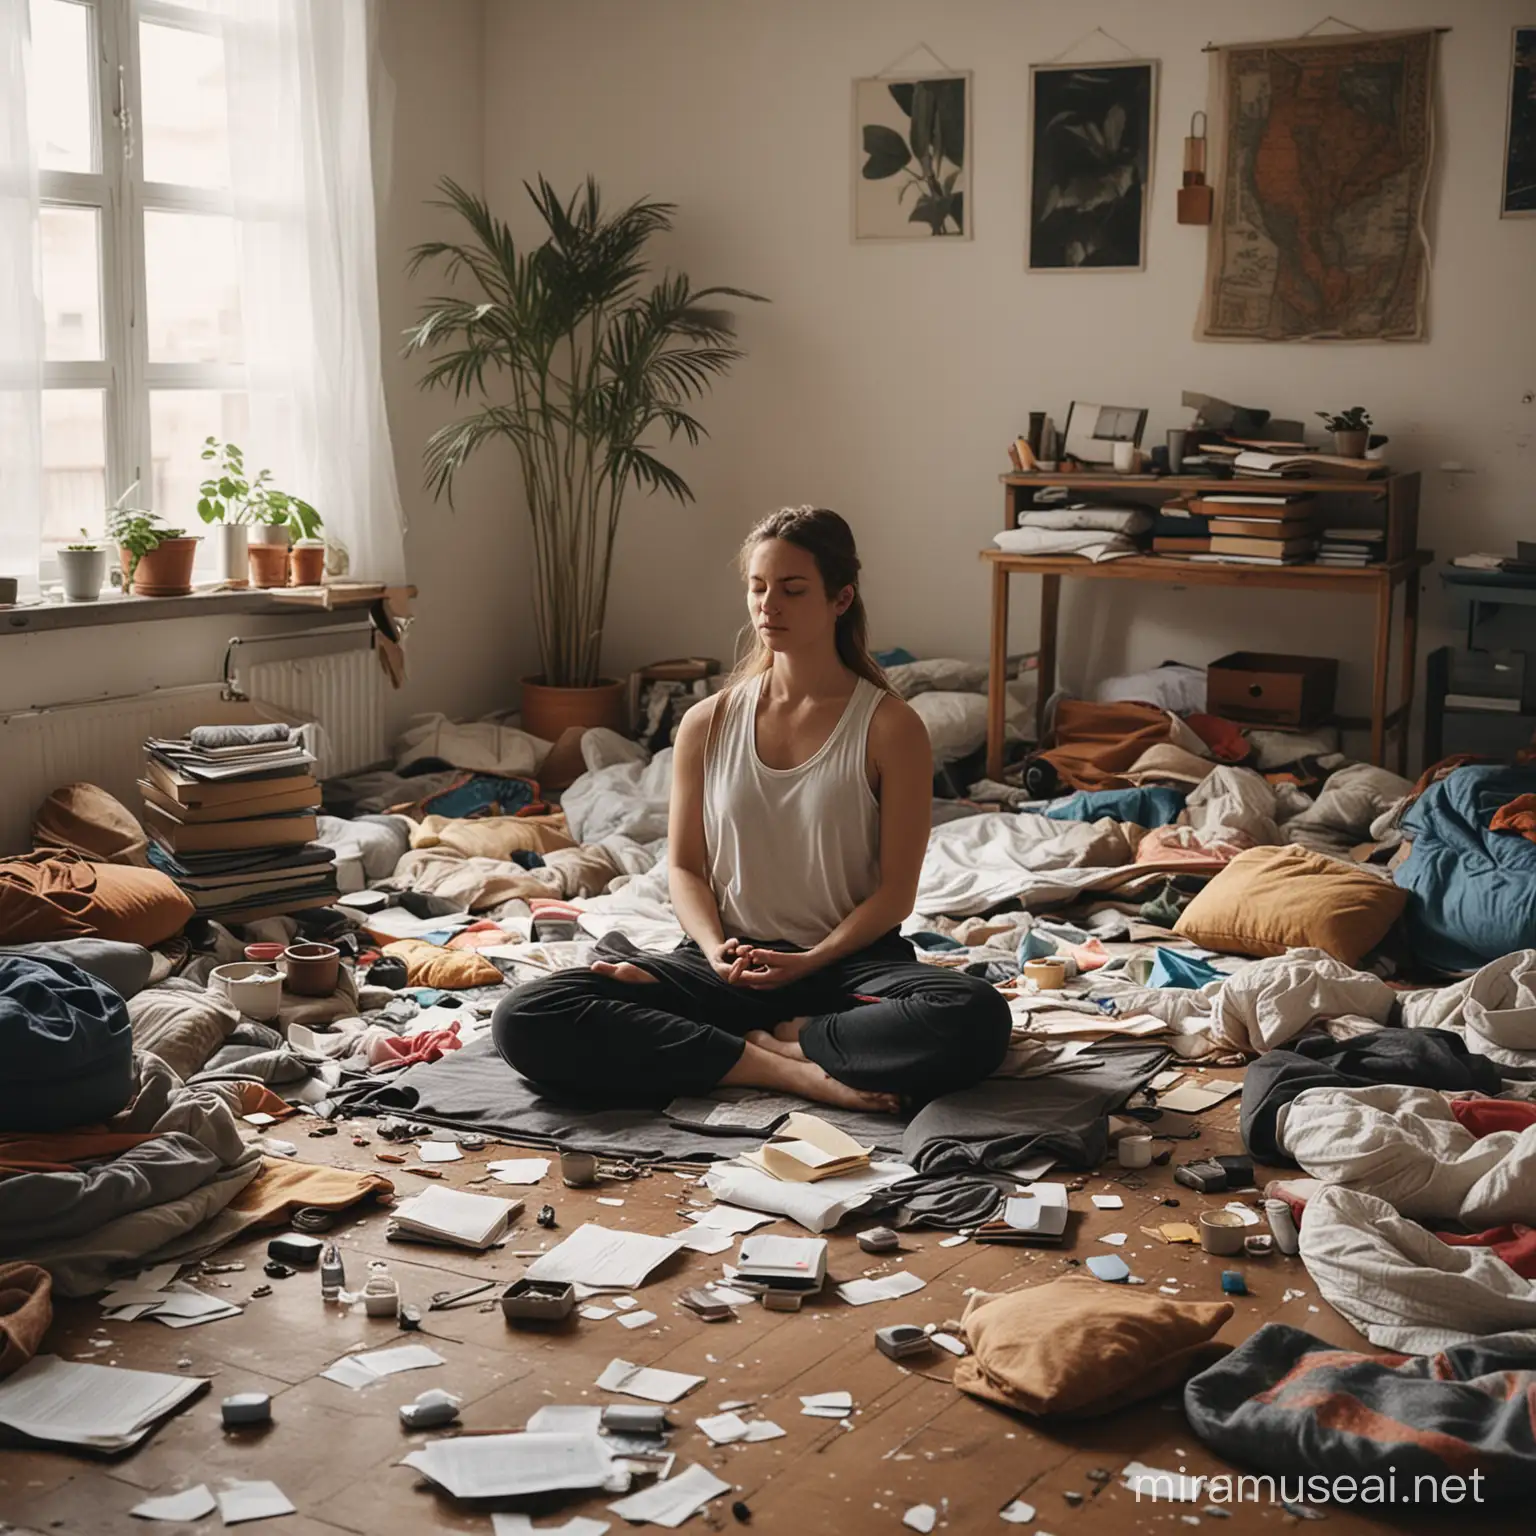  person meditating in a messy room,